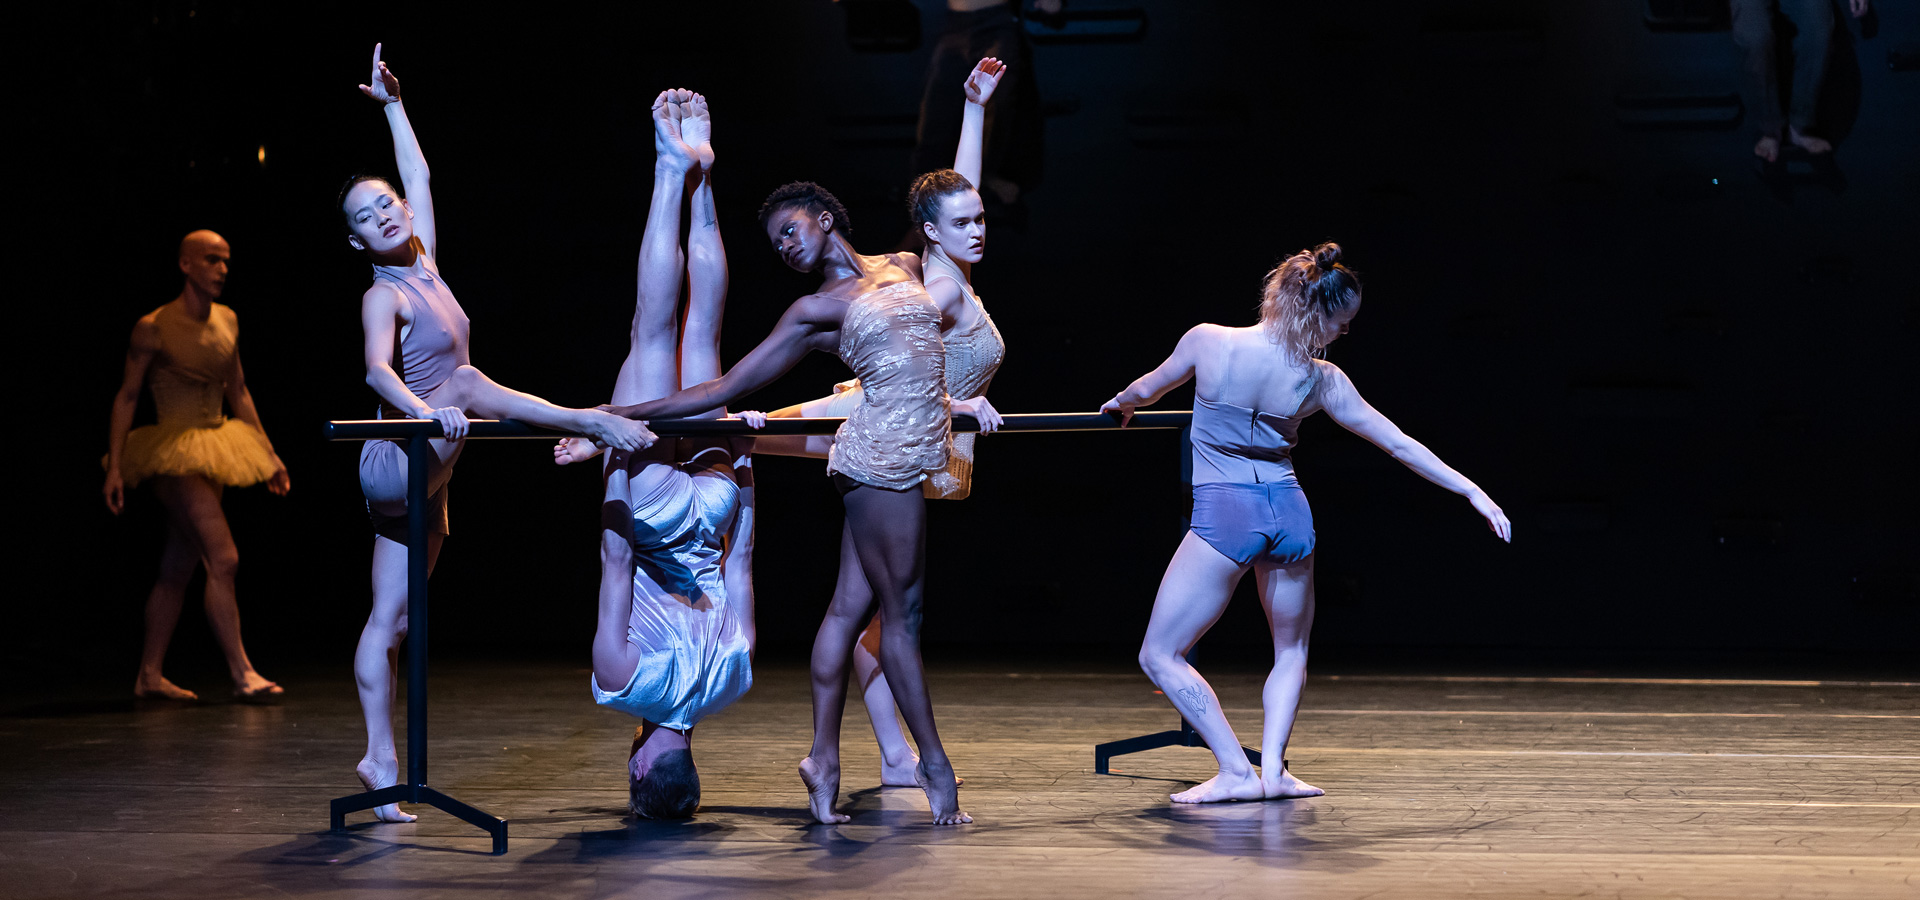 Performers in the Batsheva Dance group configure in ballet poses around a barre on the stage, one dancer balanced upside down on the crown of her head.